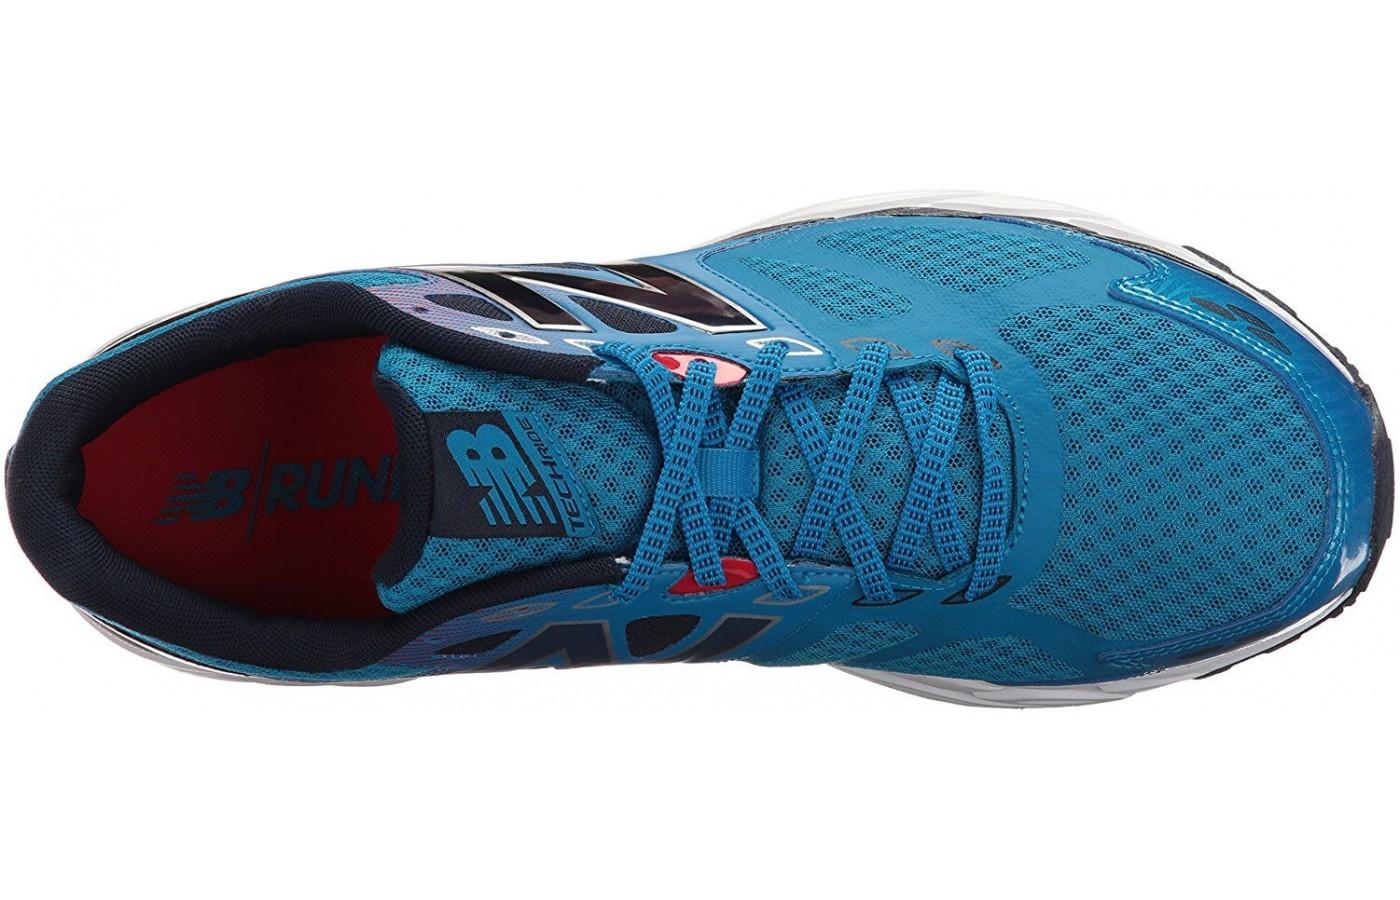 the New Balance 680 v3 offers a secure and protected ride